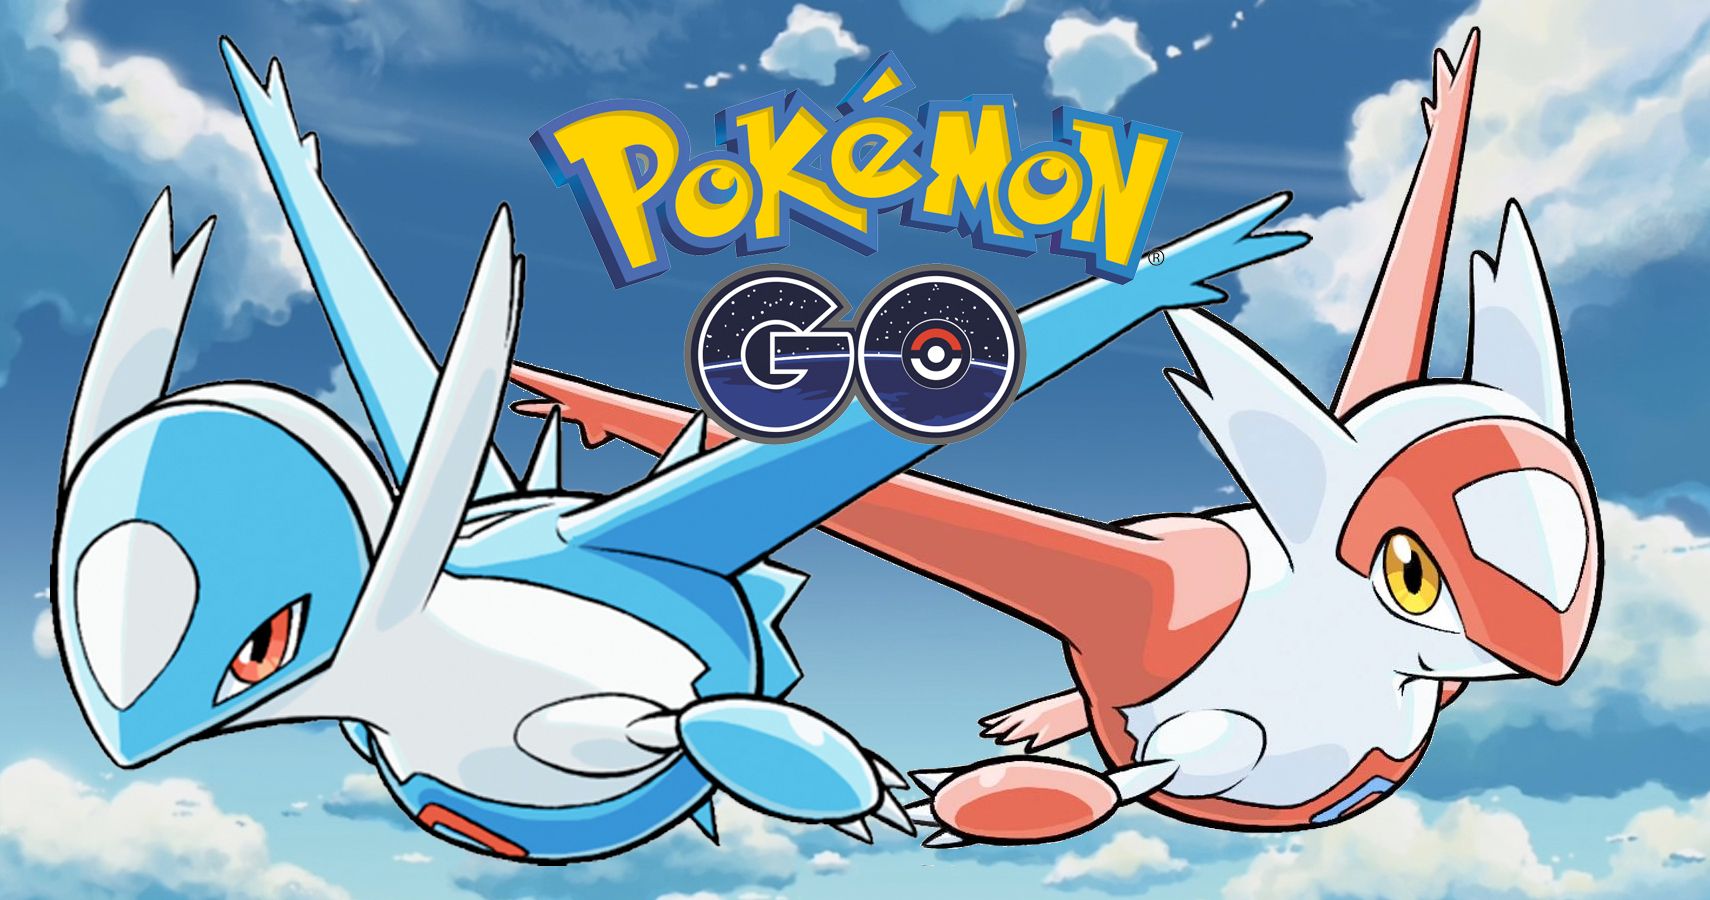 Genuine Bulk Pack Pokemon Pocket Monster Latios Latias Doll Gifts Toy Model  Anime Figures Collect Ornaments - Action Figures - AliExpress